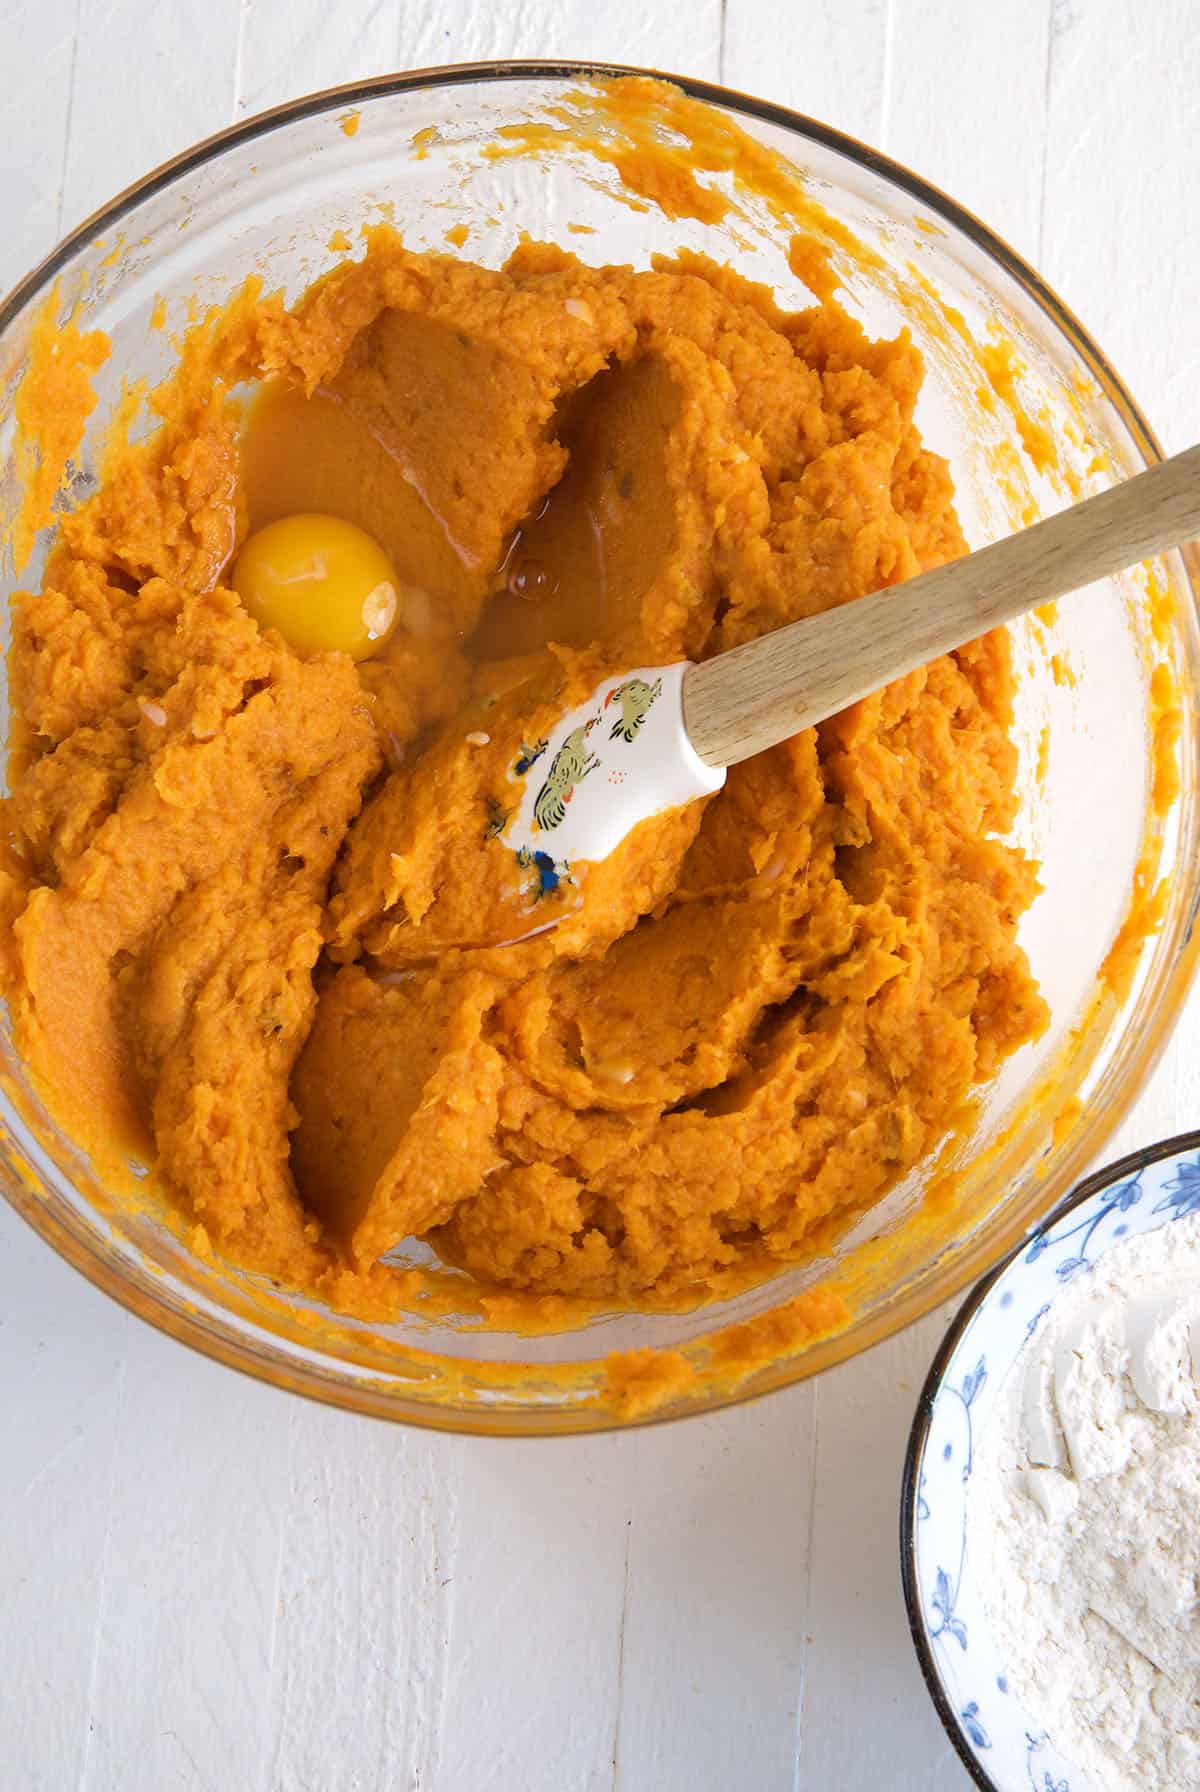 Pumpkin batter is being mixed in a glass bowl.